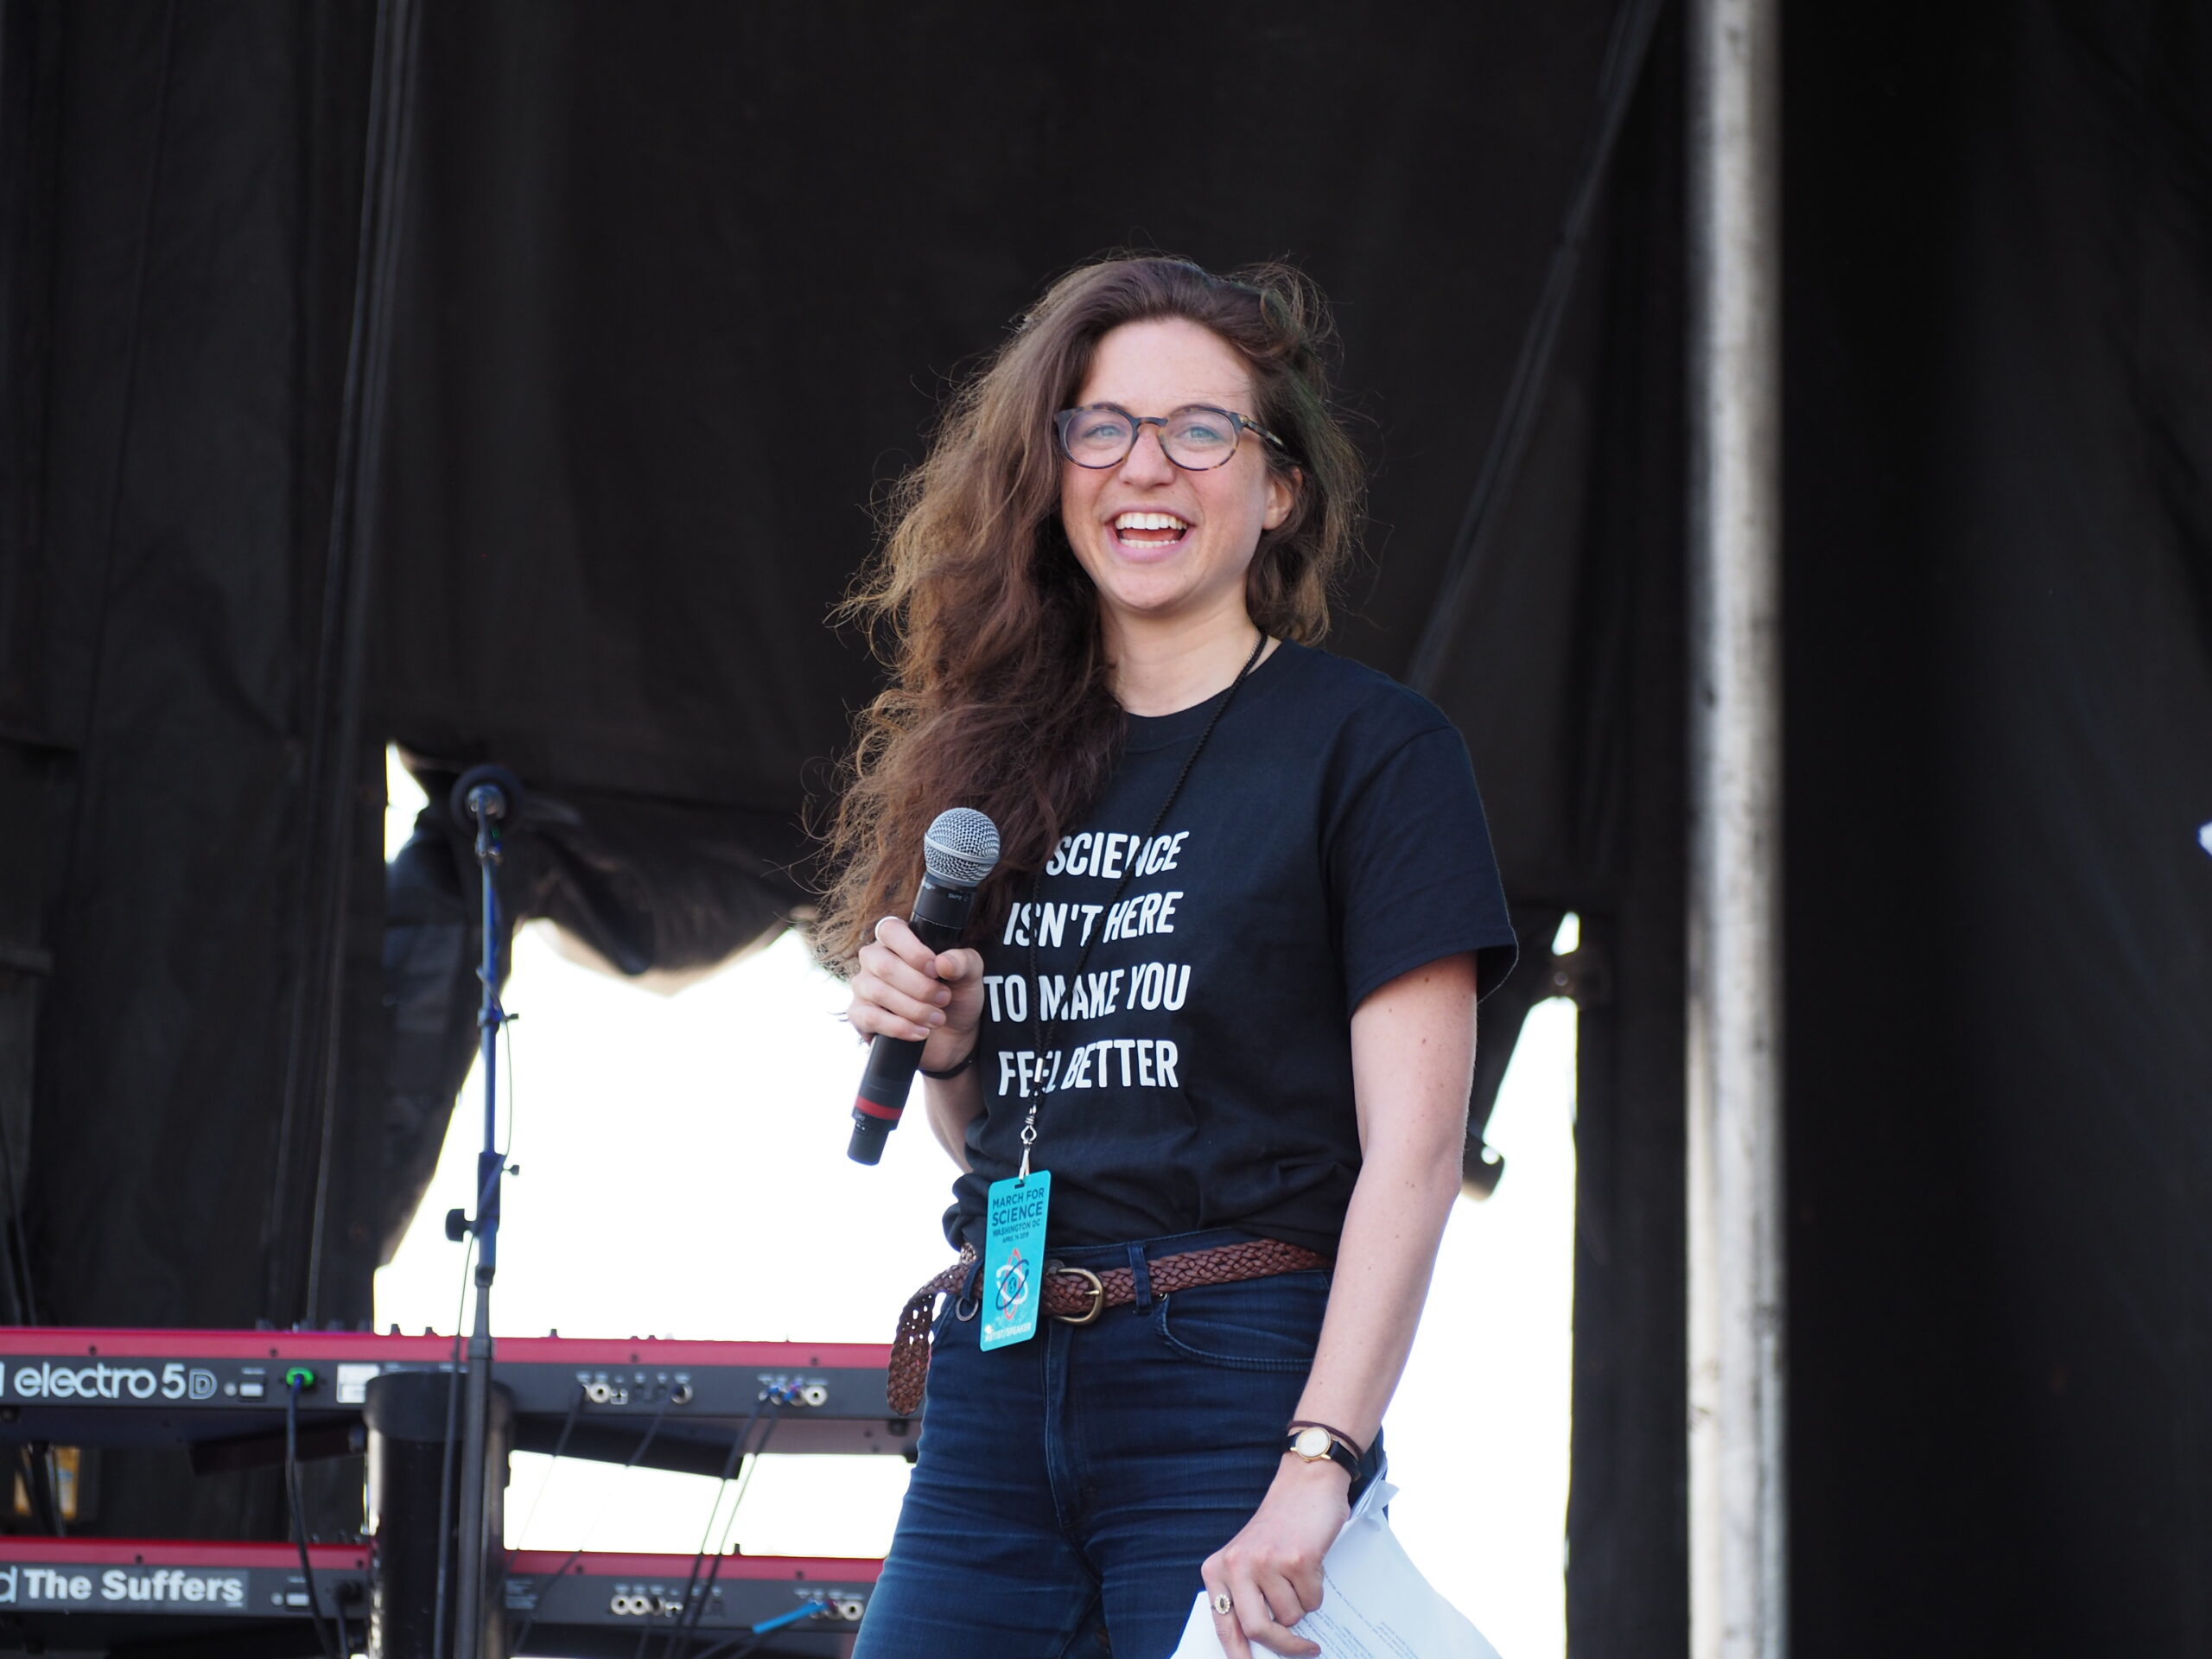 Photograph of Wendy Zukerman standing on a stage, wearing a t-shirt that says "Science isn't here to make you feel better."